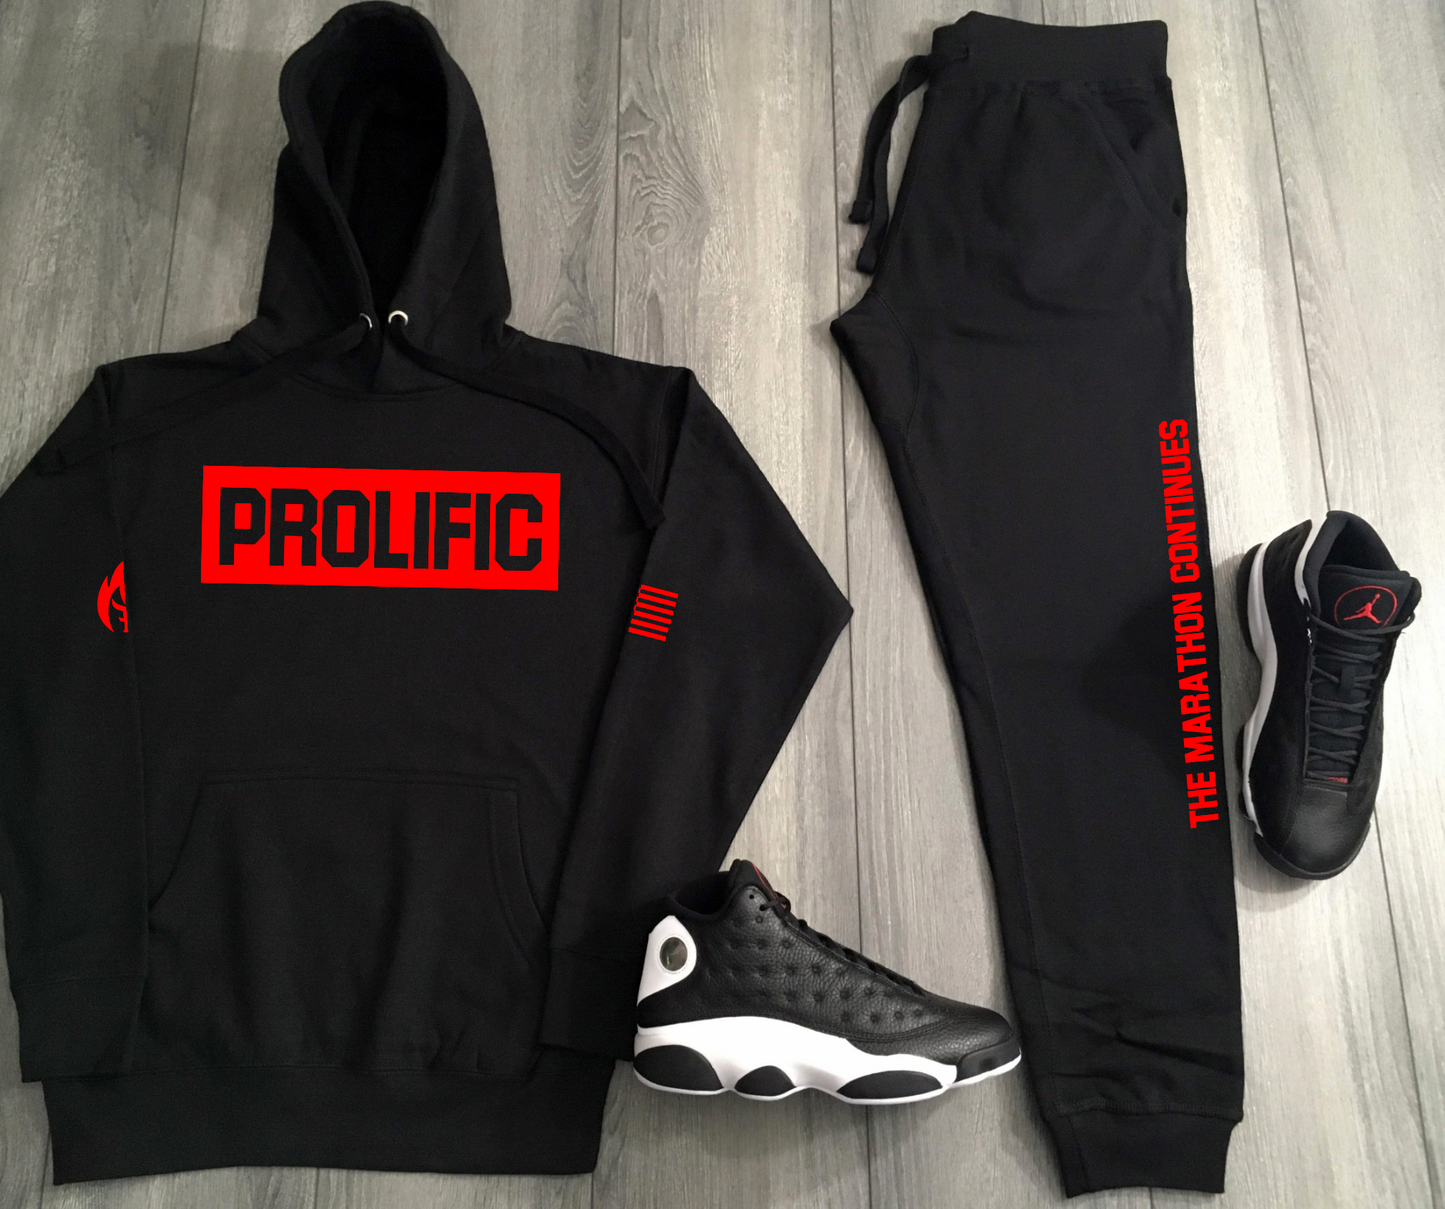 Men's Sneaker Sweatsuit PROLIFIC Graphic Inspired by Air Jordan 13 Black Red Hoodie and Joggers Set